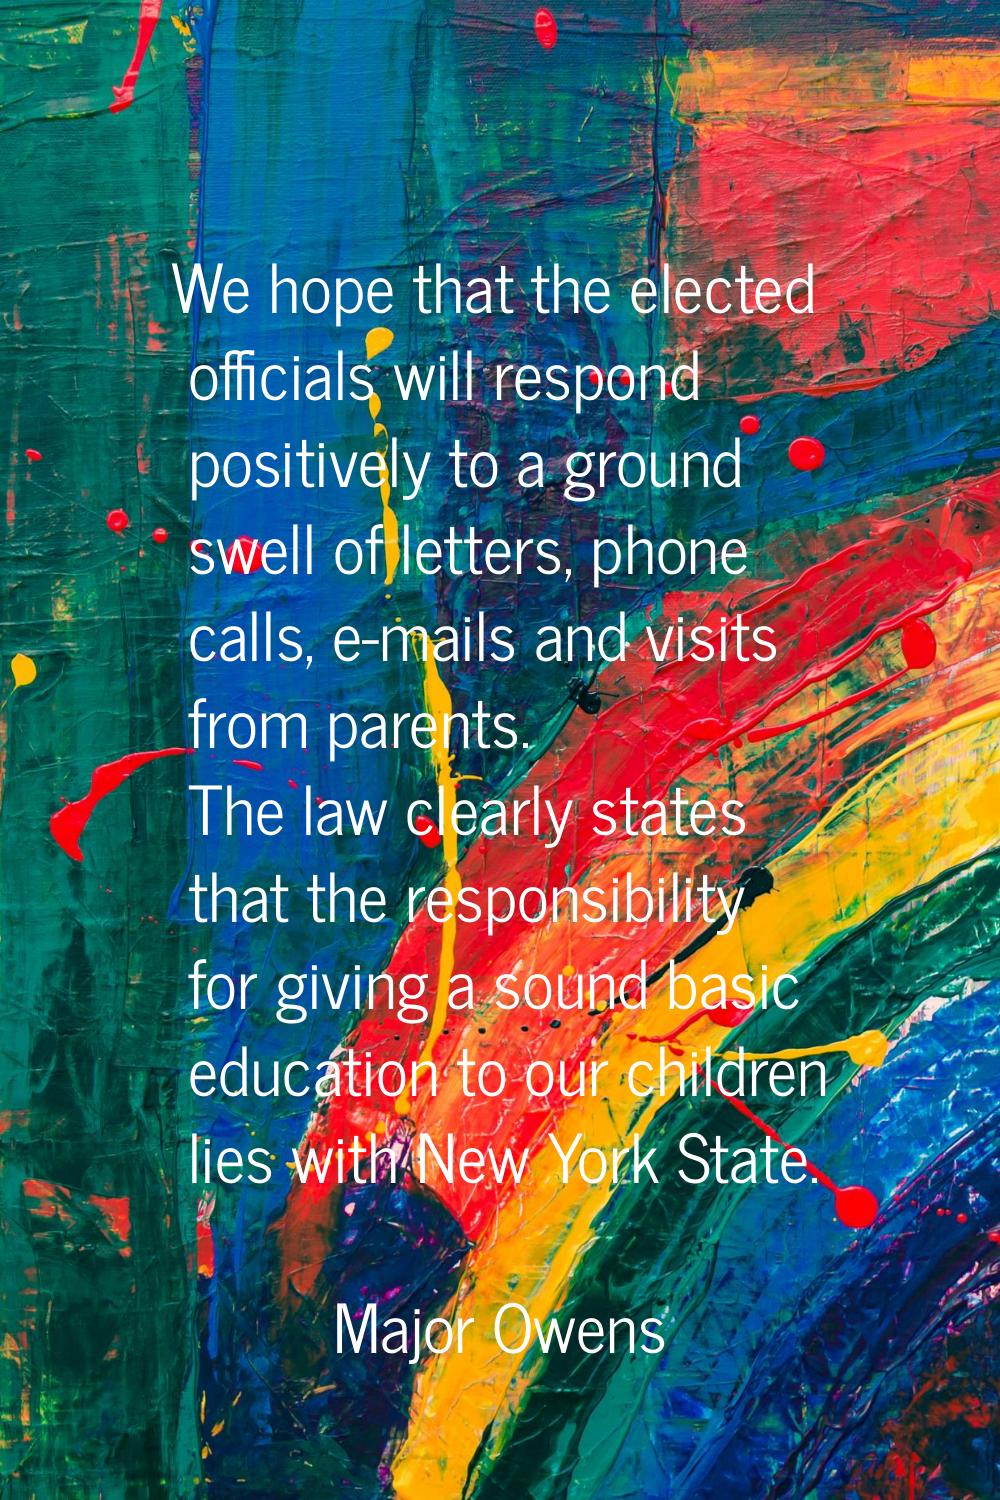 We hope that the elected officials will respond positively to a ground swell of letters, phone call